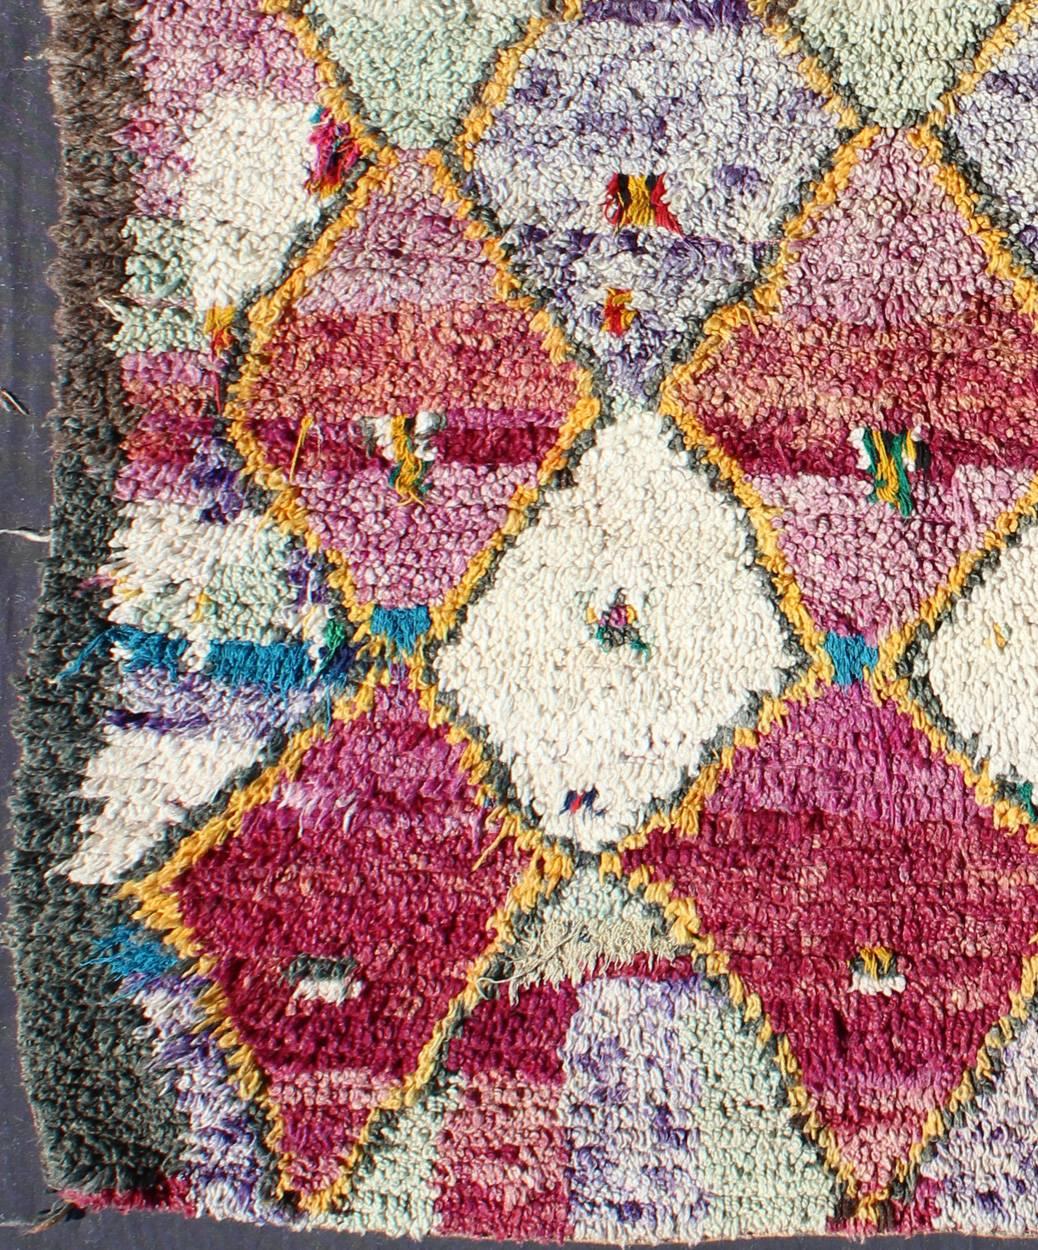 Colorful vintage Moroccan rug with pink, yellow, turquoise, ivory, gray diamonds, rug bds-136636, country of origin type: Moroccan, circa mid-20th century

This graphic handwoven, tribal-style Berber rug features an all-over design of